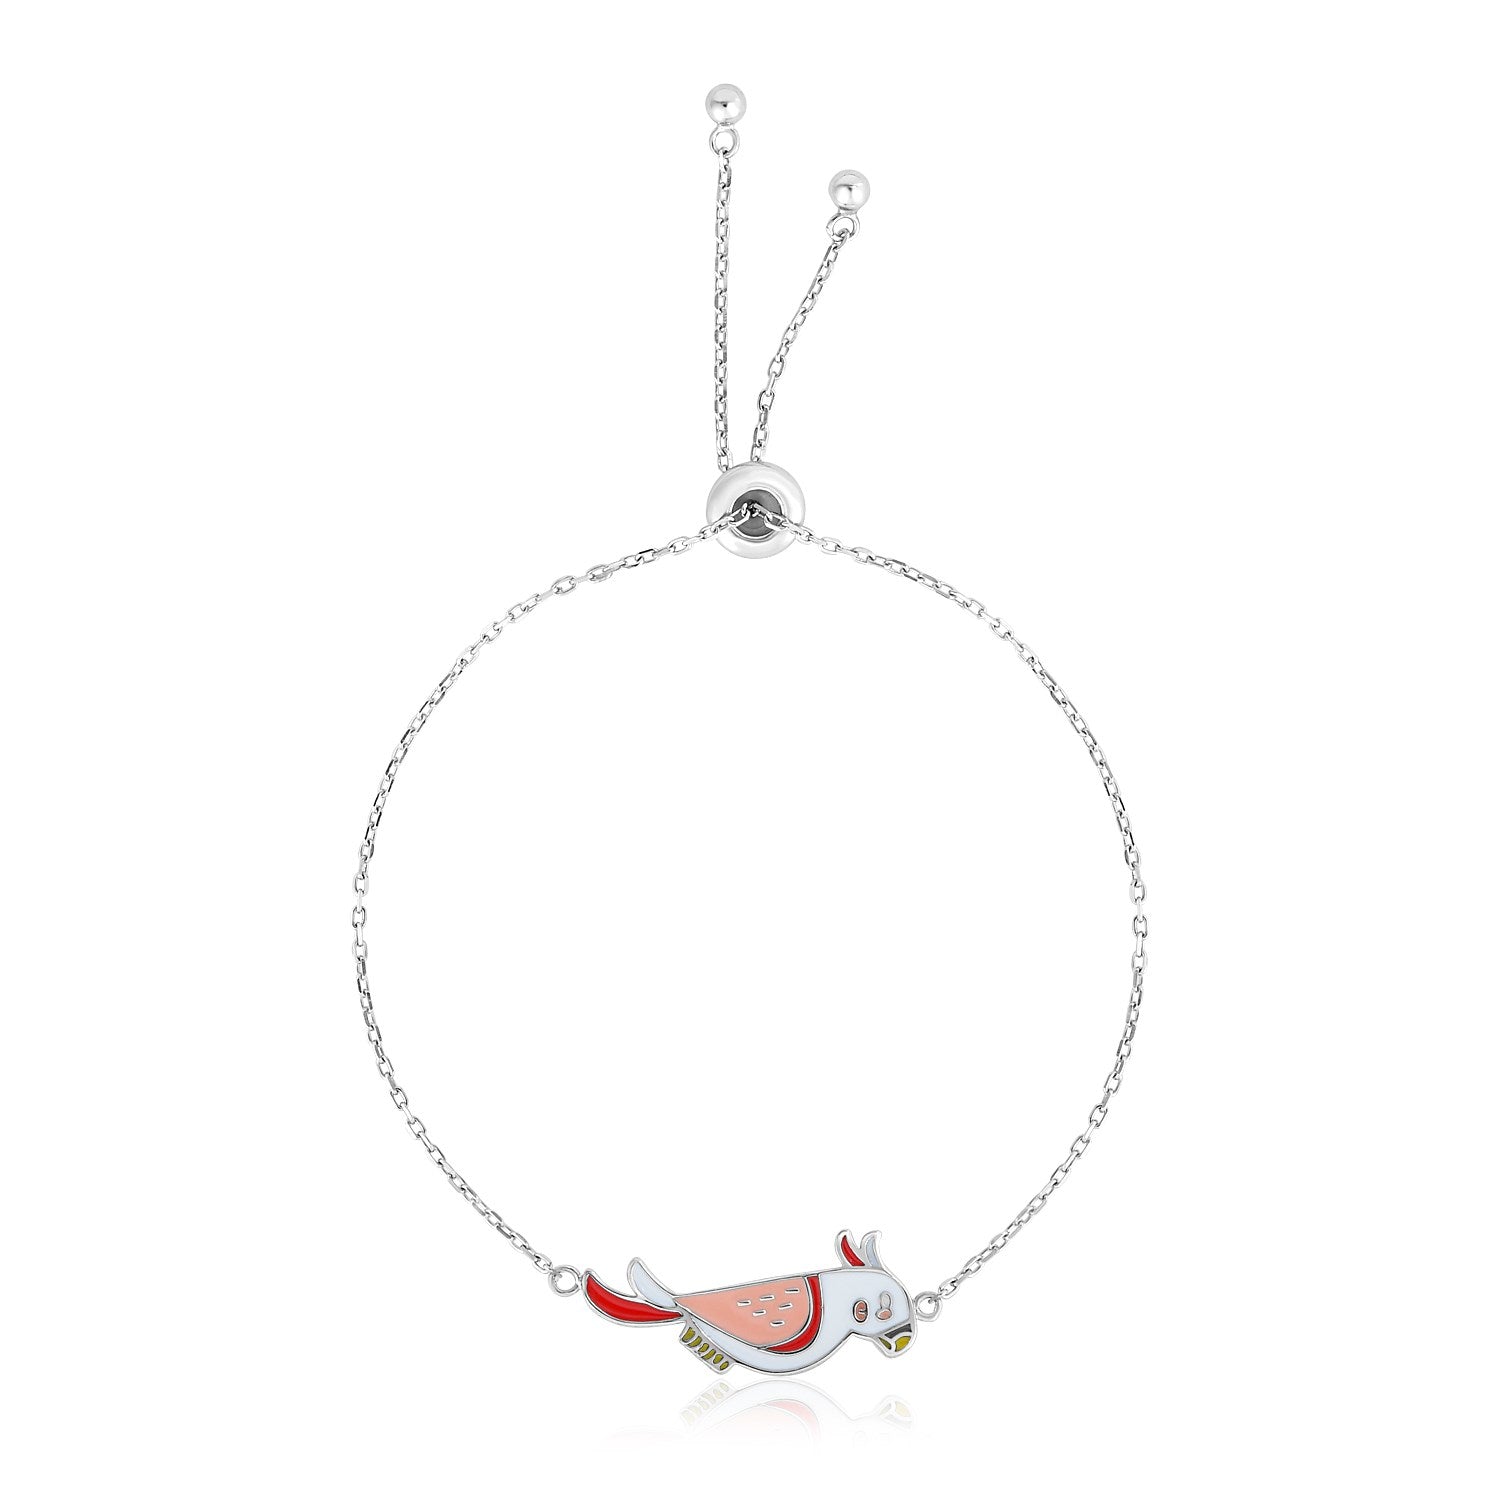 Sterling Silver 9 1/4 inch Adjustable Bracelet with Enameled Pink and White Bird